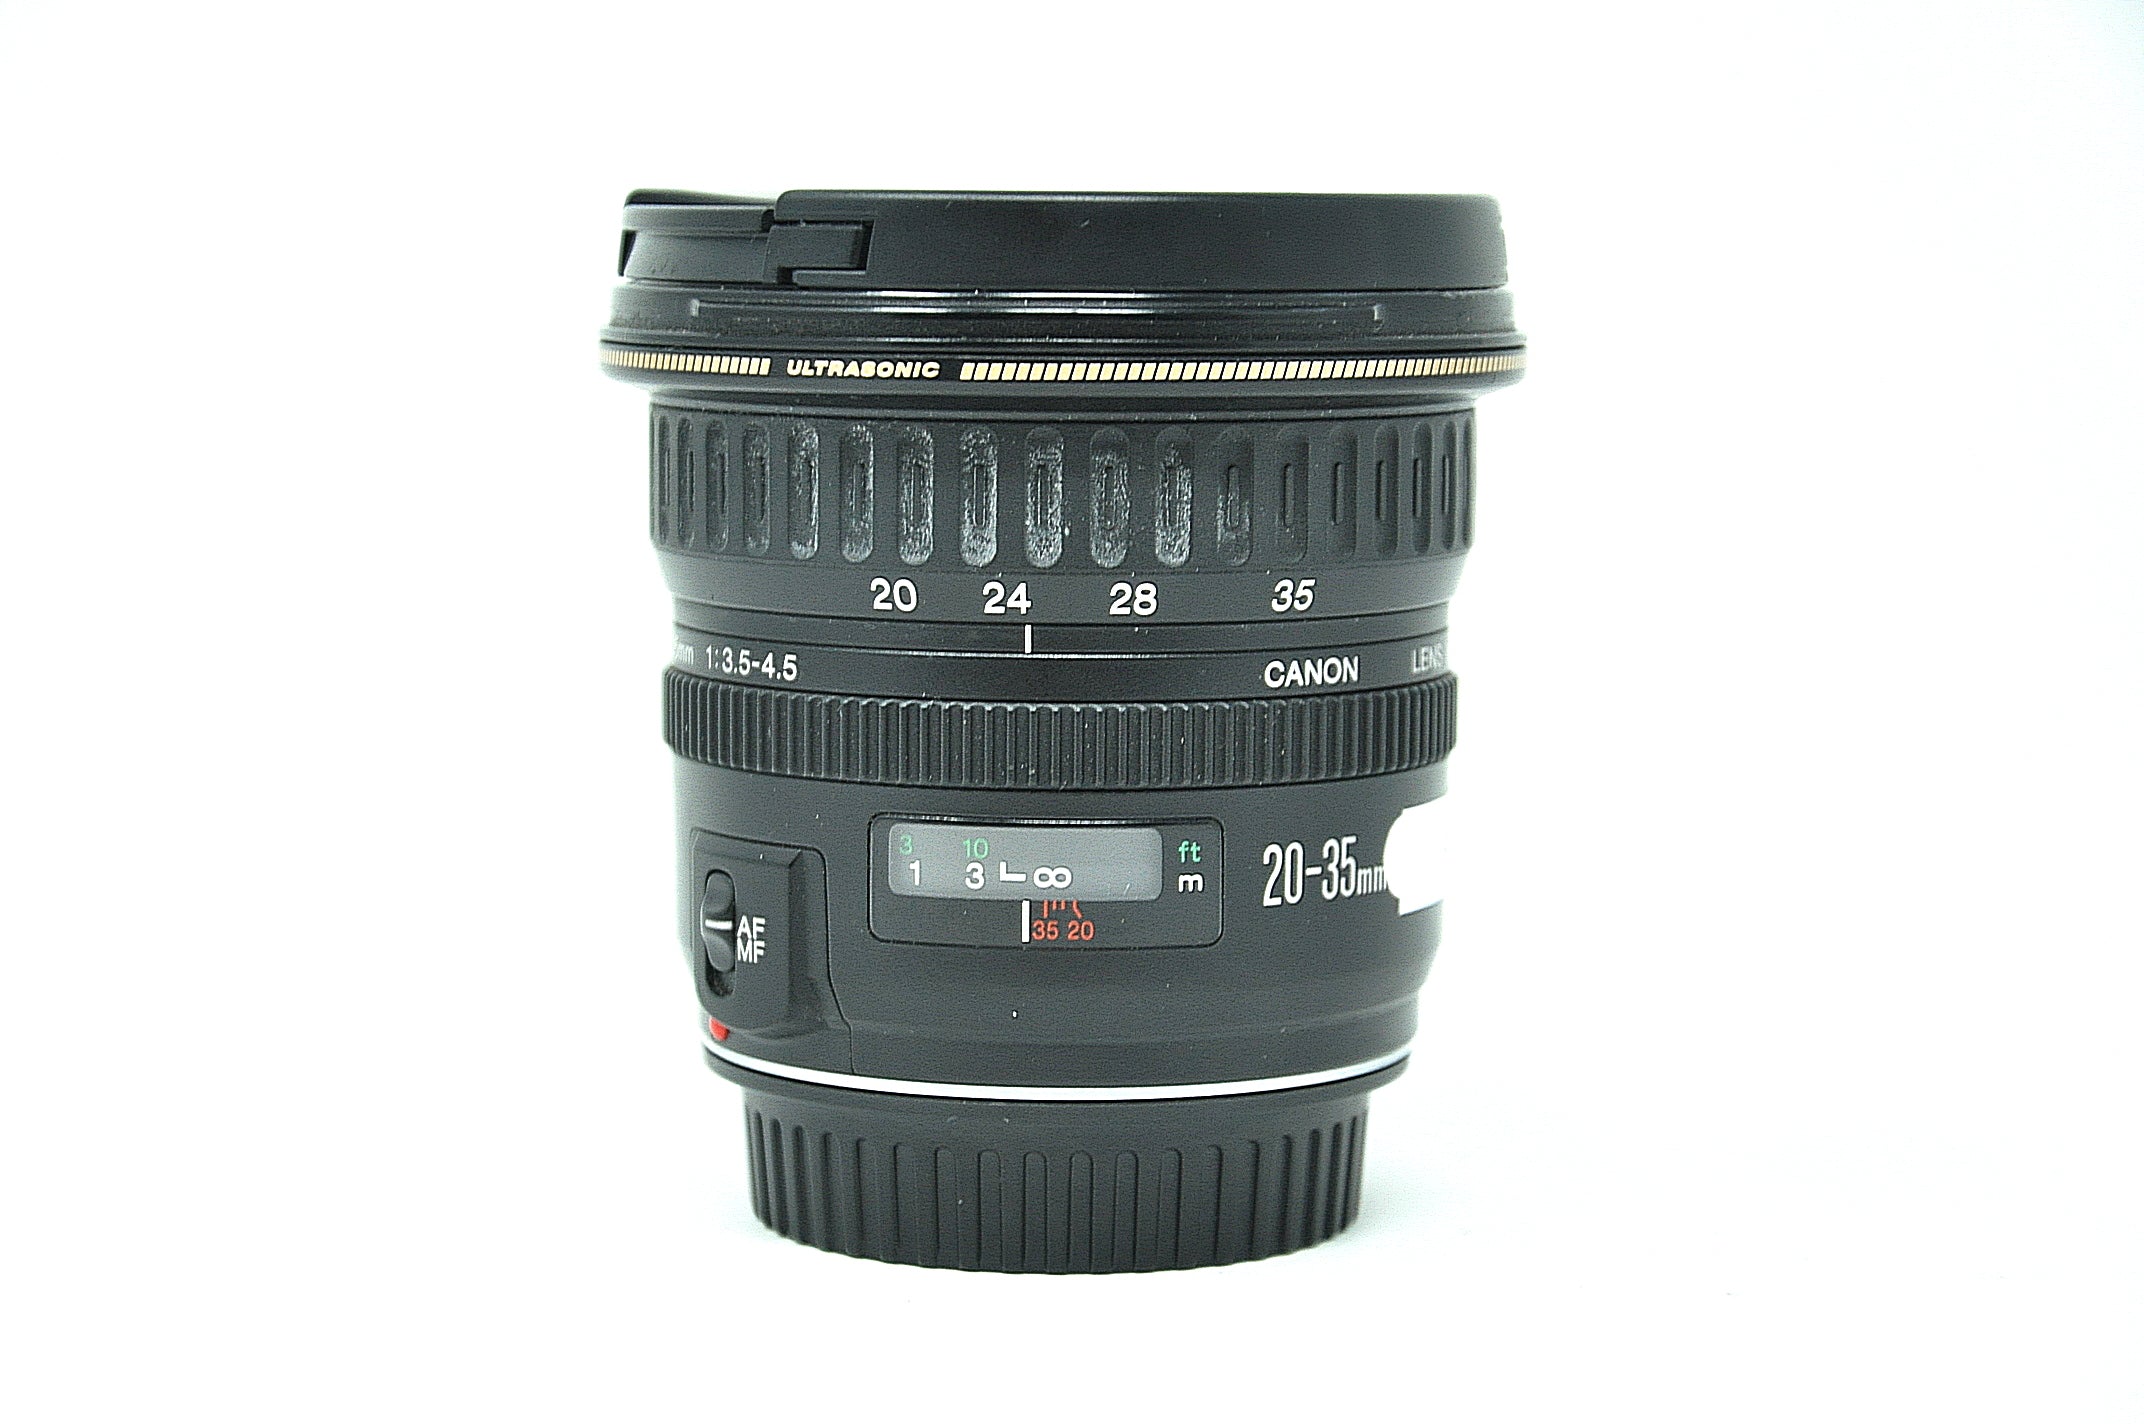 Used Canon EF 20-35mm F3.5-4.5 wide angle zoom lens (SH39450)